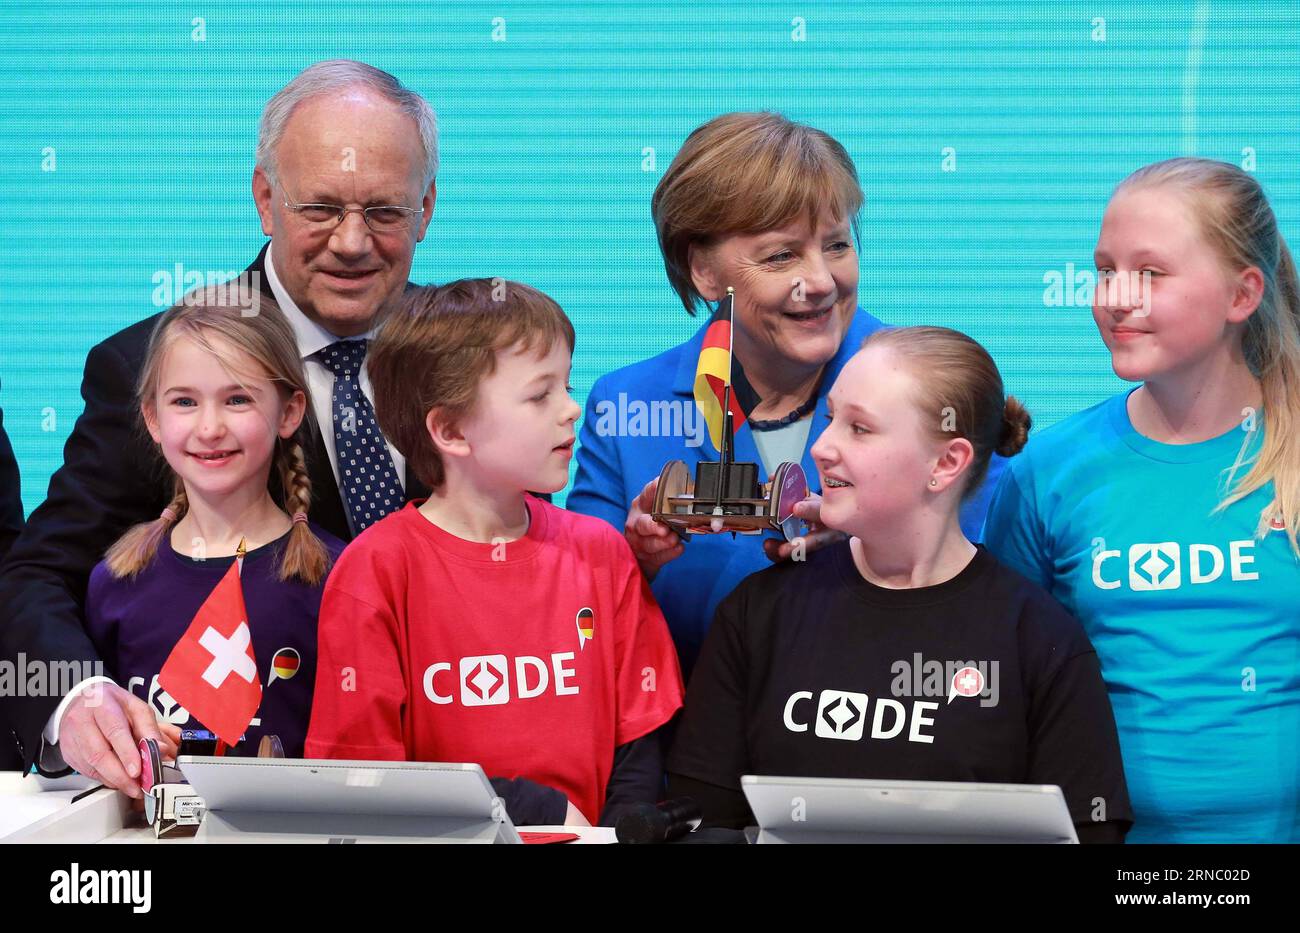 (160315) -- HANOVER, March 15, 2016 -- German chancellor Angela Merkel (C, rear) and Swiss President Johann Schneider-Ammann (L, rear) visit the Microsoft booth during their visit to the CeBIT 2016 in Hanover, central Germany, on March 15, 2016. Switzerland is the partner country of the CeBIT 2016. ) GERMANY-HANOVER-CEBIT-SWITZERLAND LuoxHuanhuan PUBLICATIONxNOTxINxCHN   Hanover March 15 2016 German Chancellor Angela Merkel C Rear and Swiss President Johann Schneider Ammann l Rear Visit The Microsoft Booth during their Visit to The CeBit 2016 in Hanover Central Germany ON March 15 2016 Switzer Stock Photo